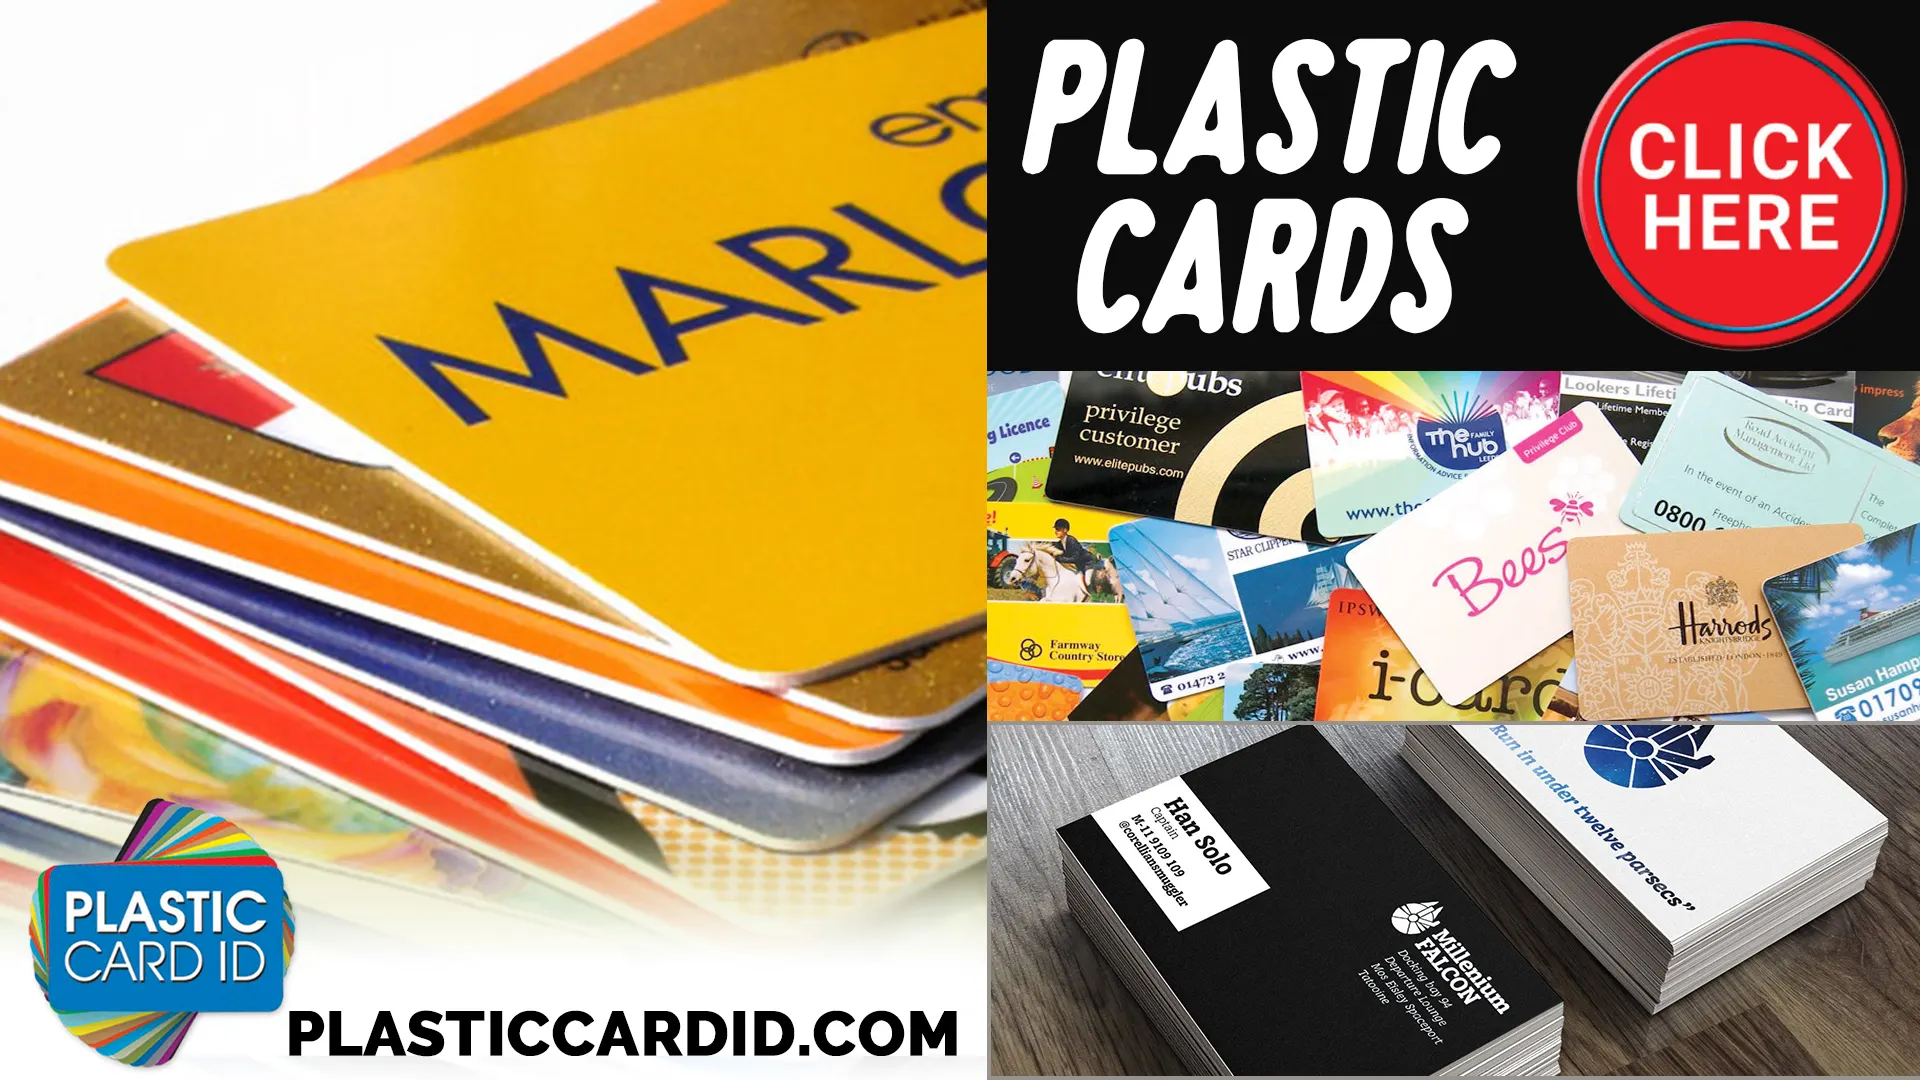 Plastic Card ID
's Customer Service  Here to Make Your Evolis Experience Even Better